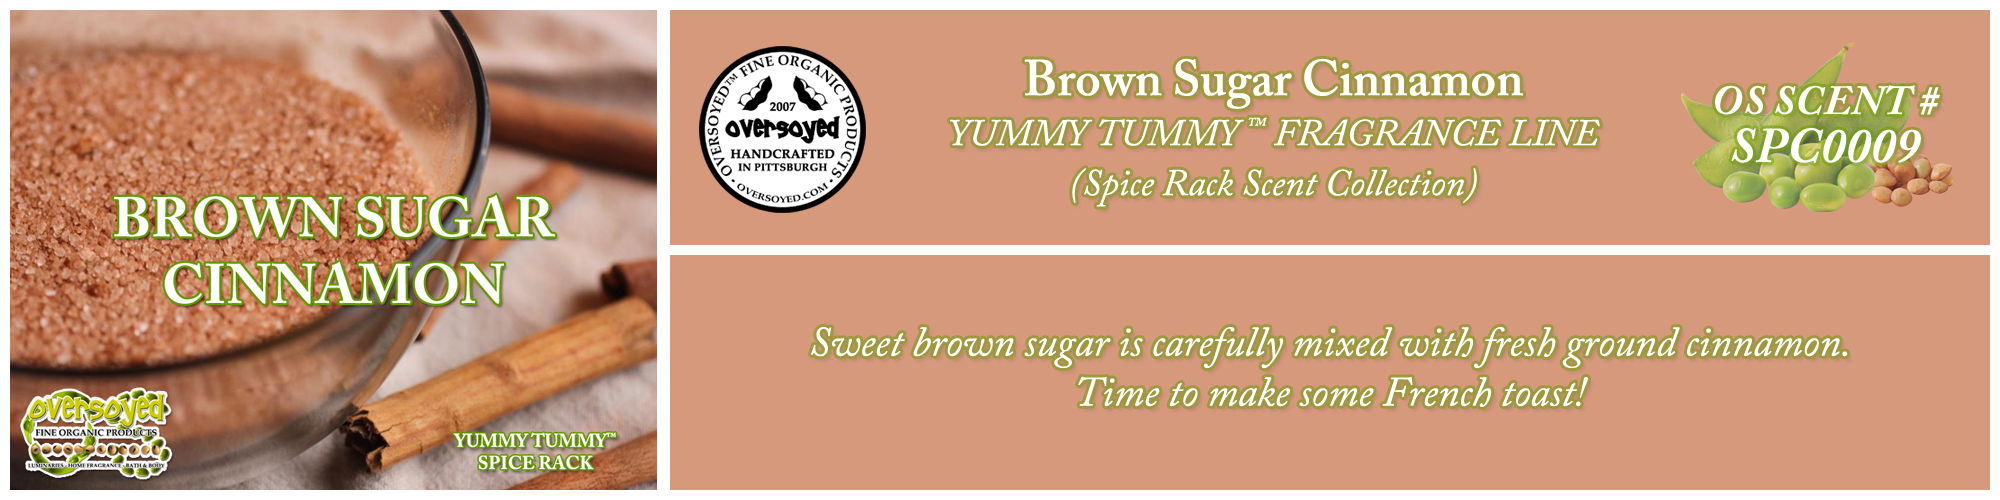 Brown Sugar Cinnamon Handcrafted Products Collection